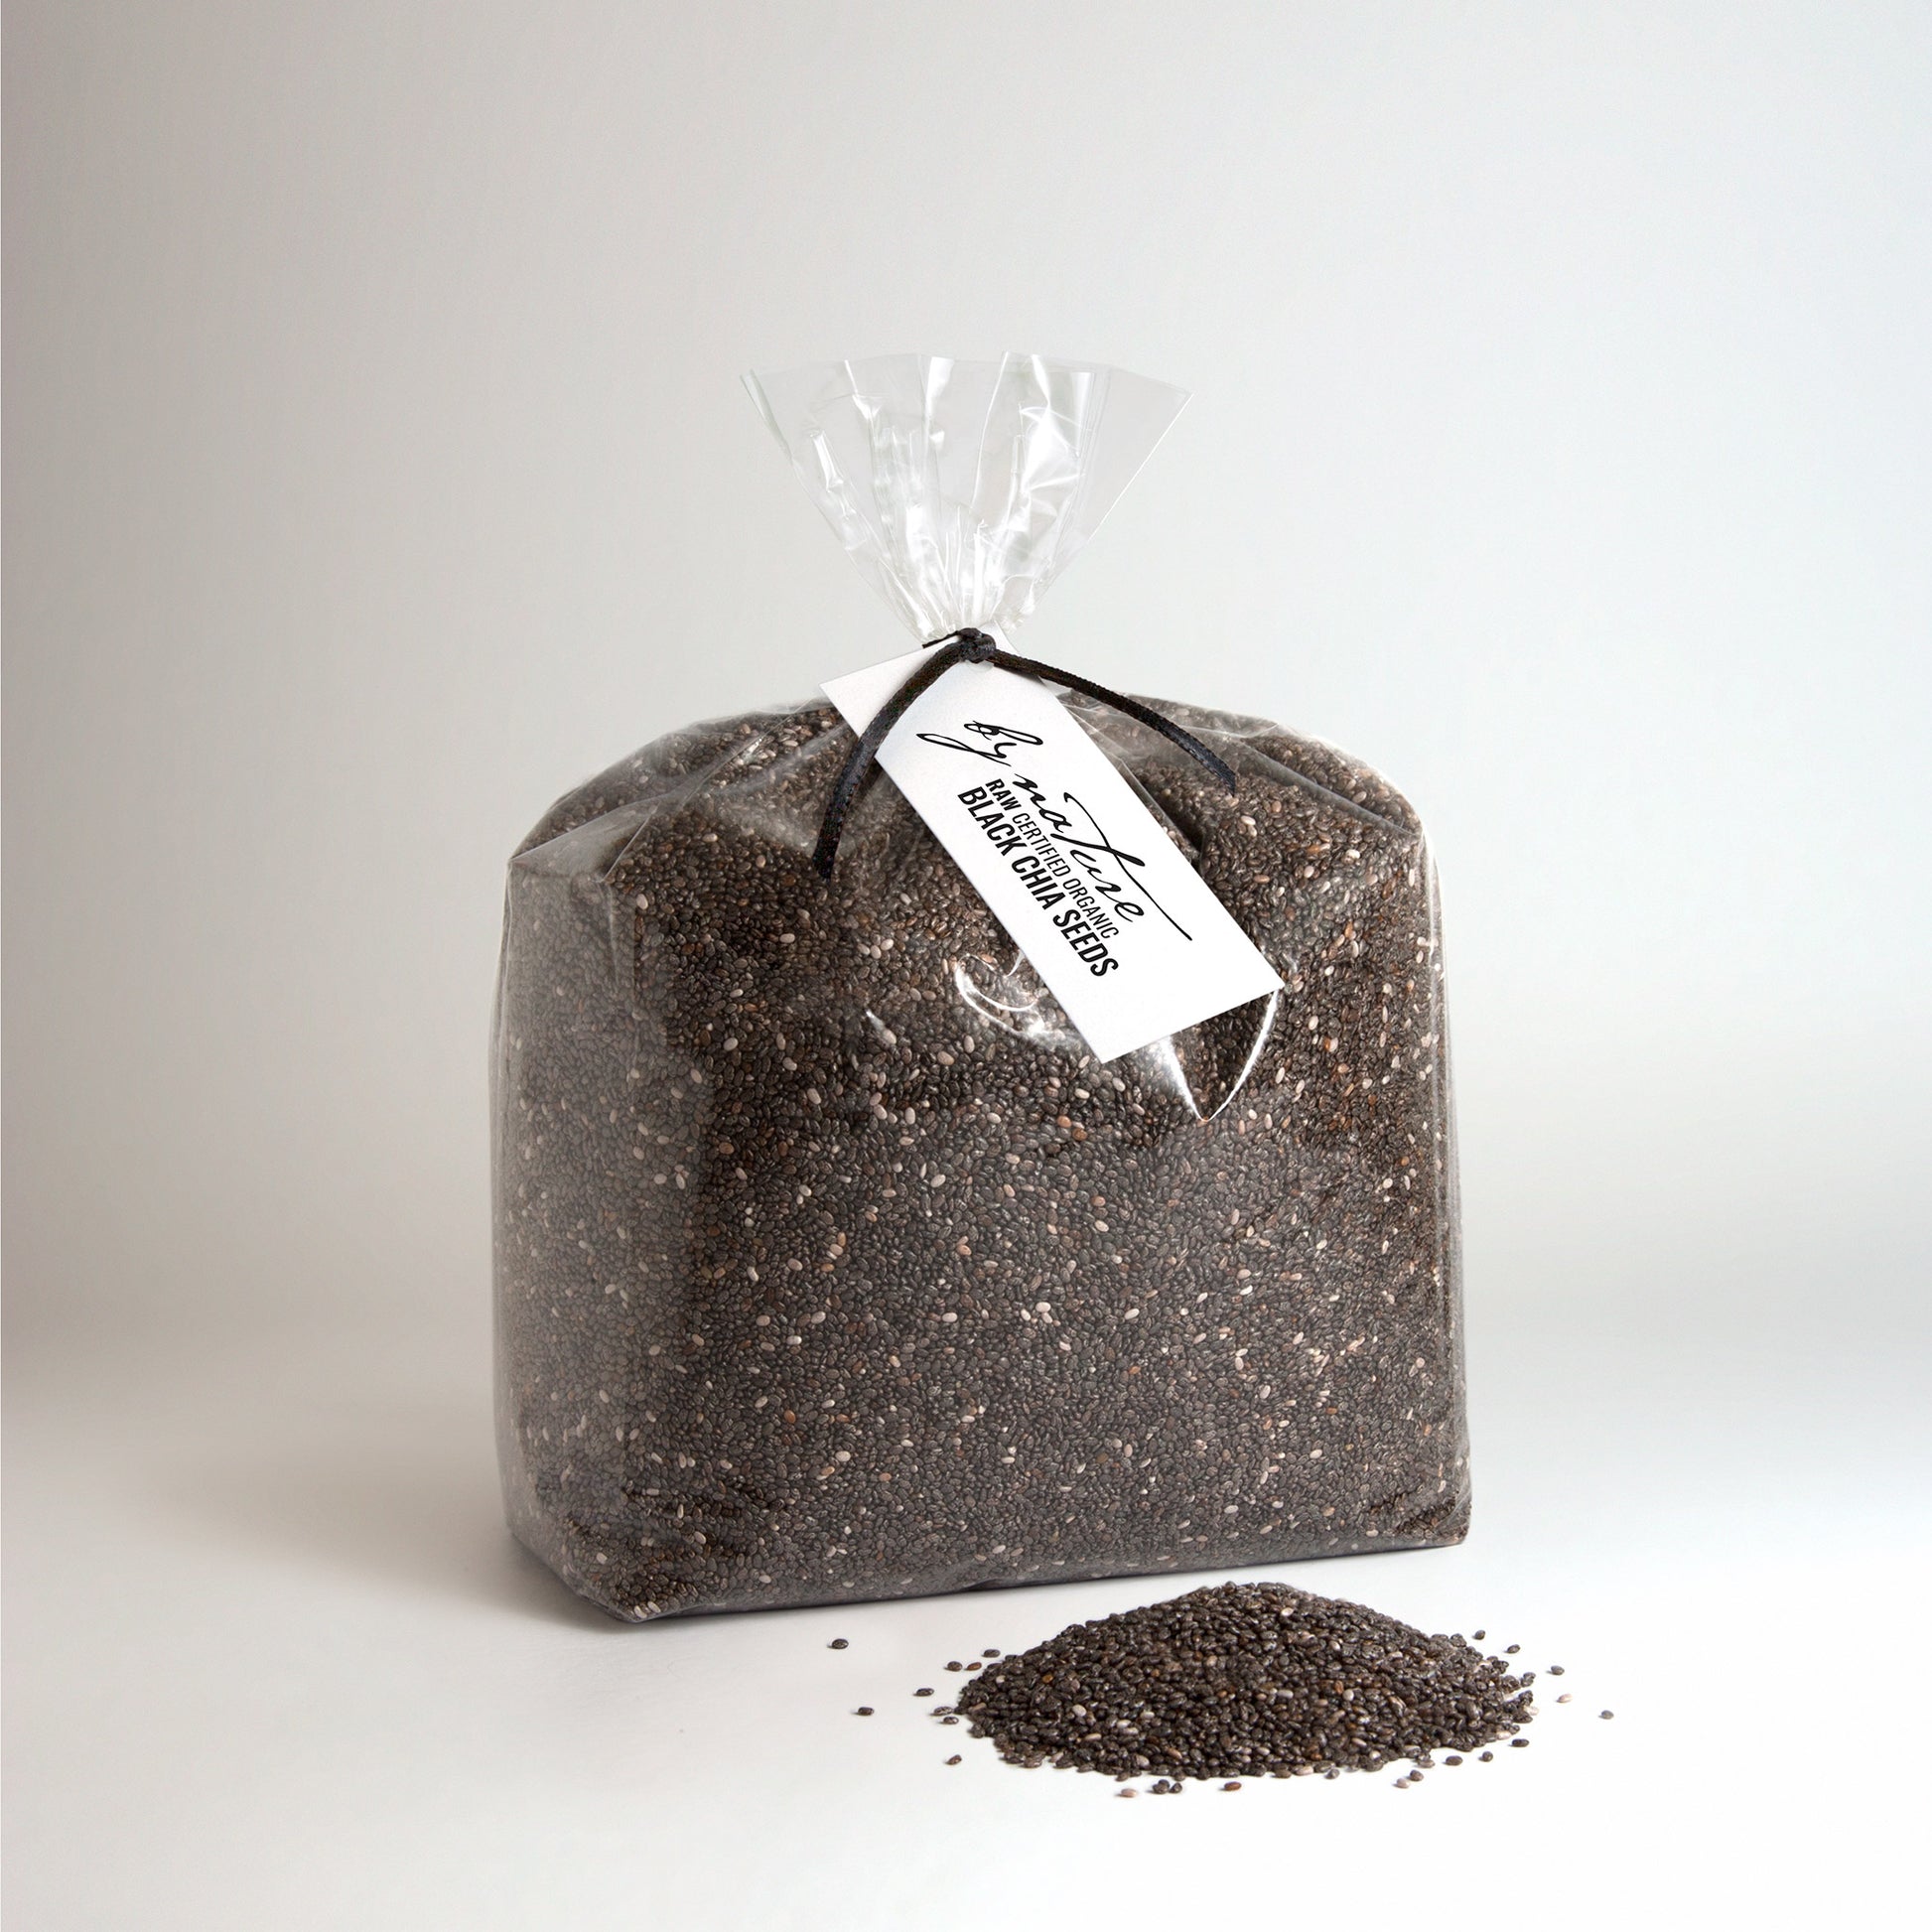 BY NATURE Black Chia Seeds, 1kg - raw, certified organic at source.